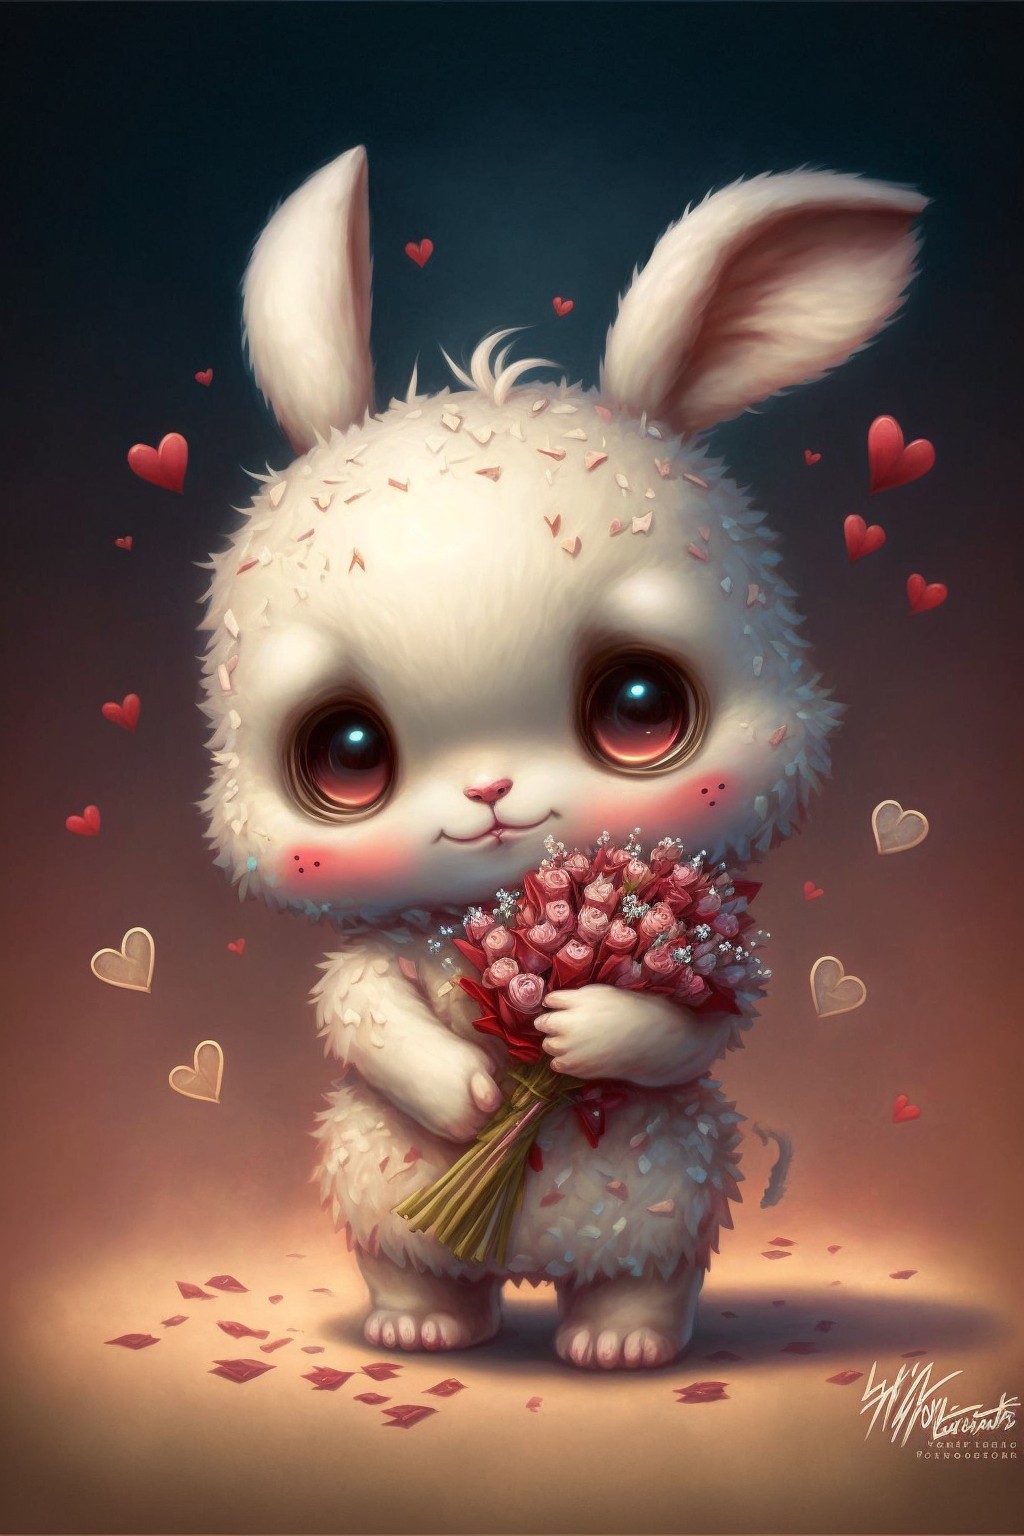 20 images of cute little bunny holding roses by Midjourney